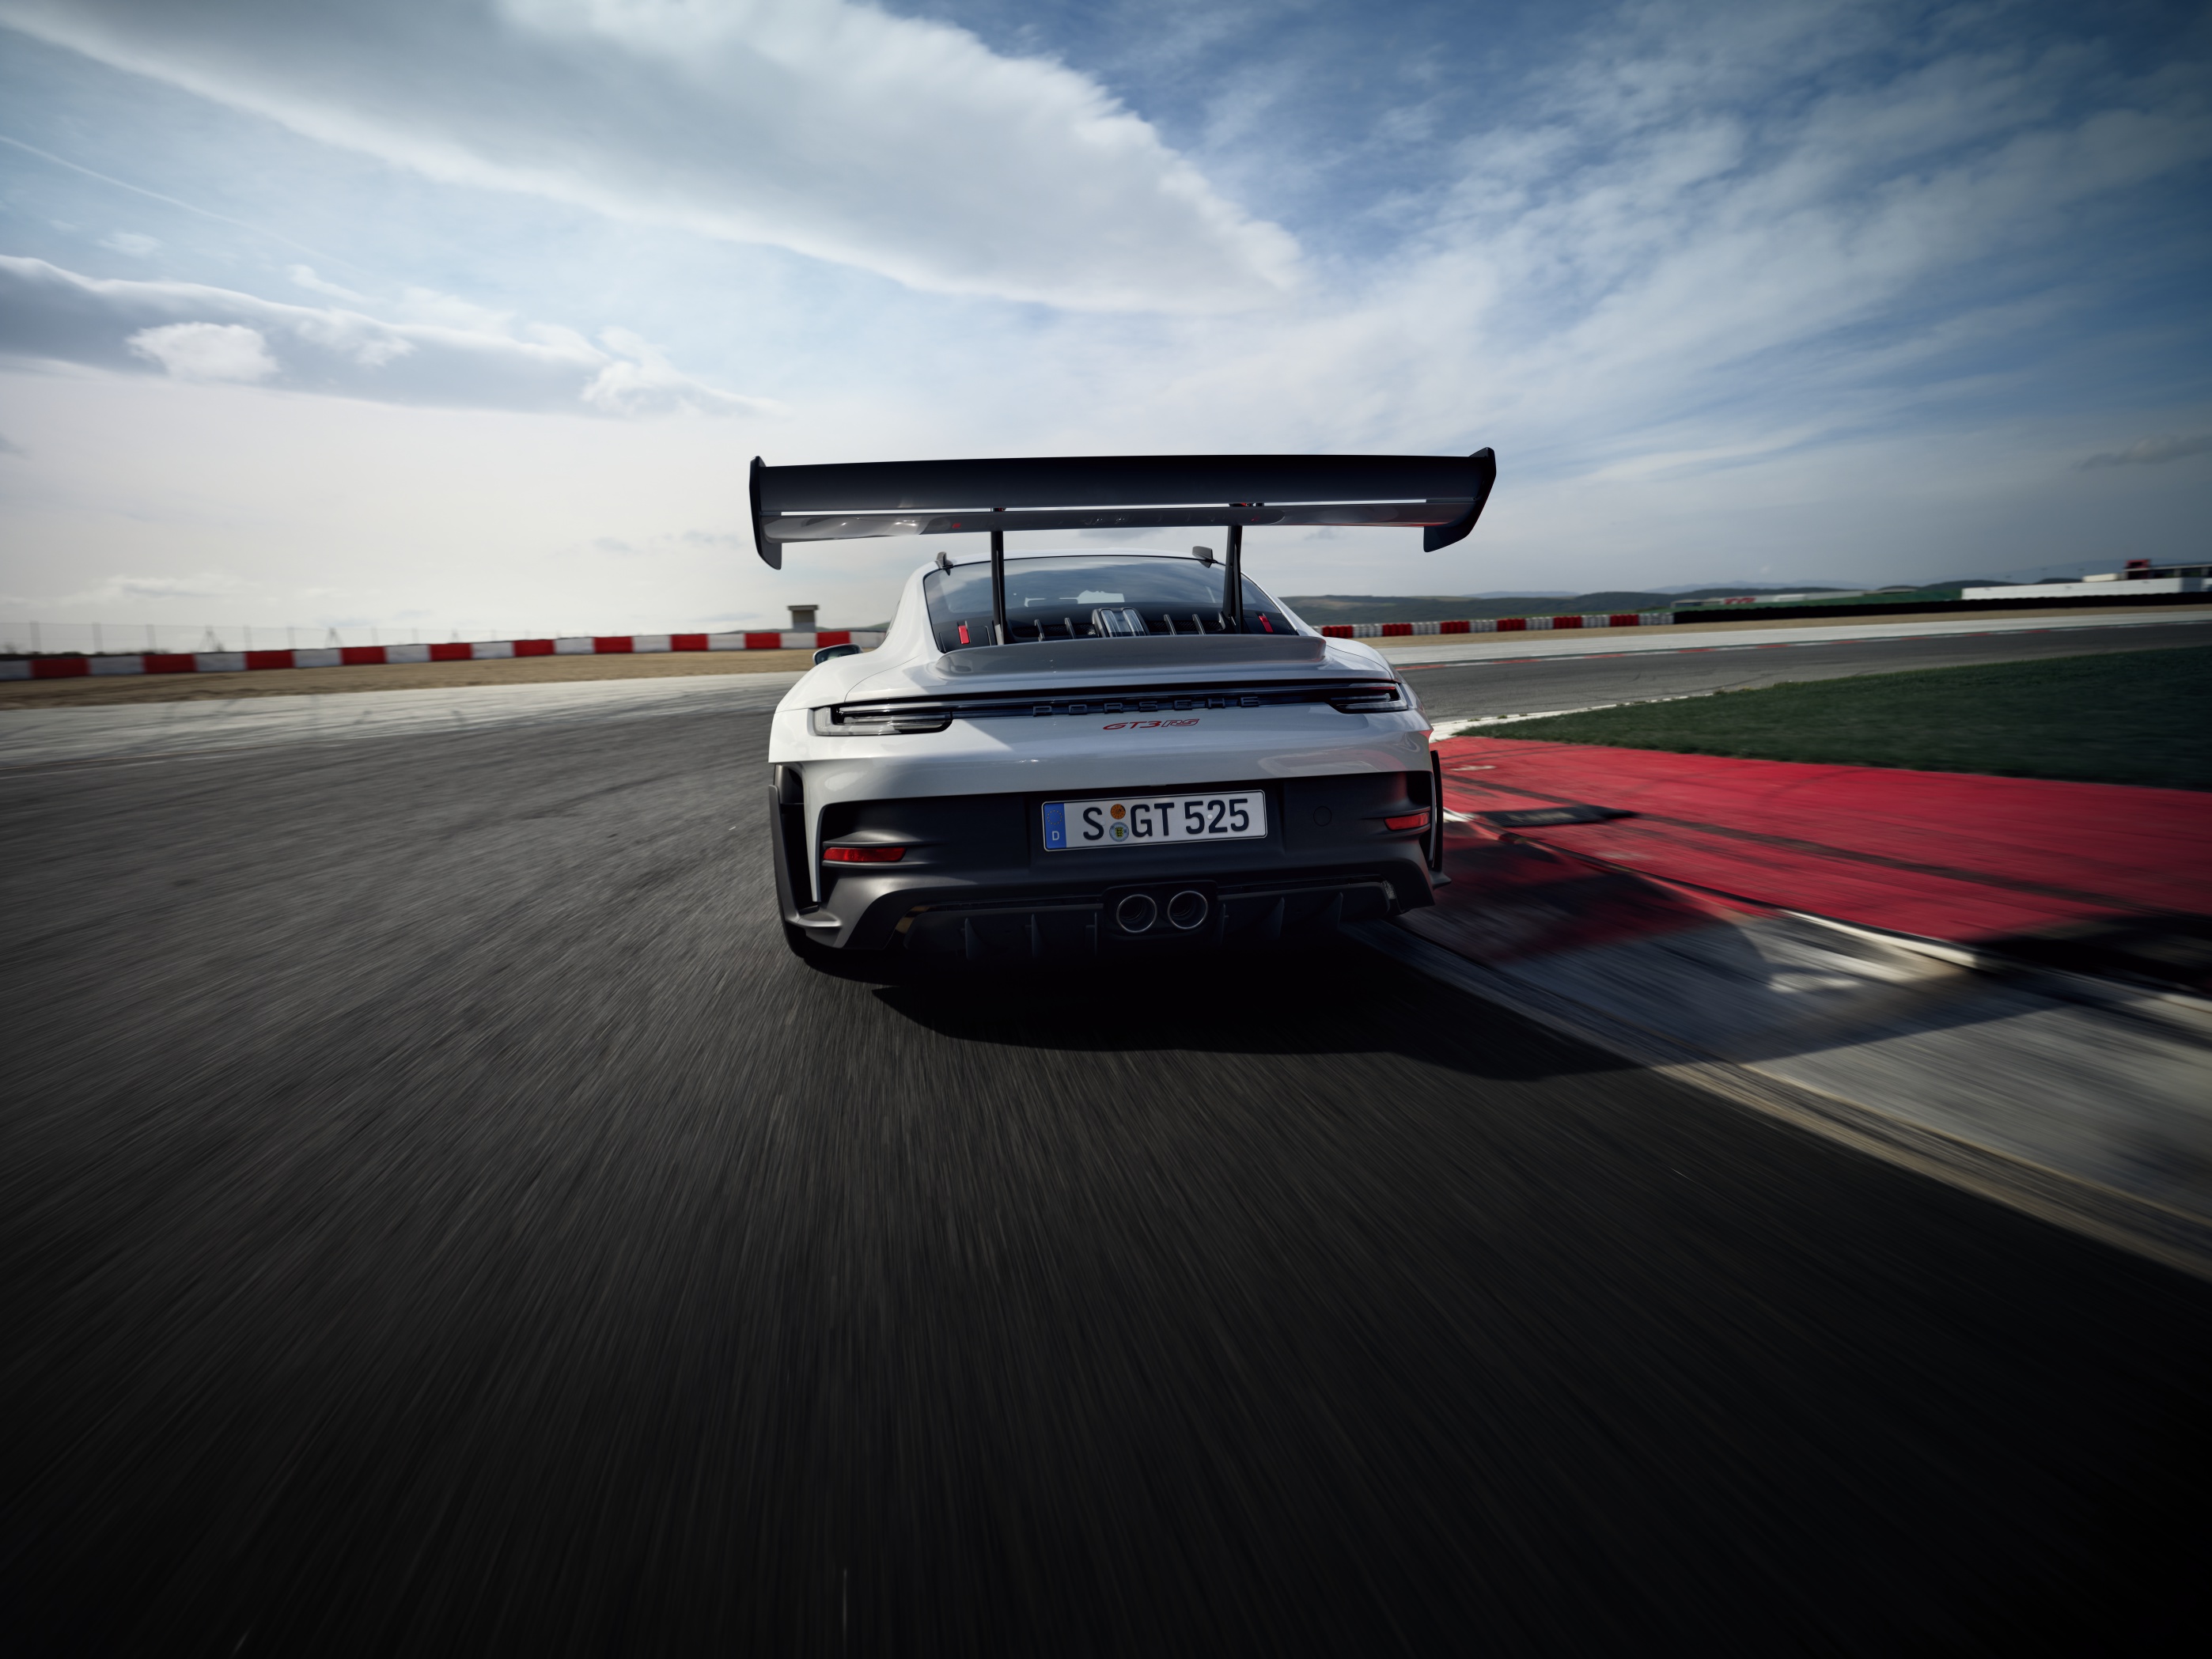 Porsche 911 GT3 on track – view of rear wing